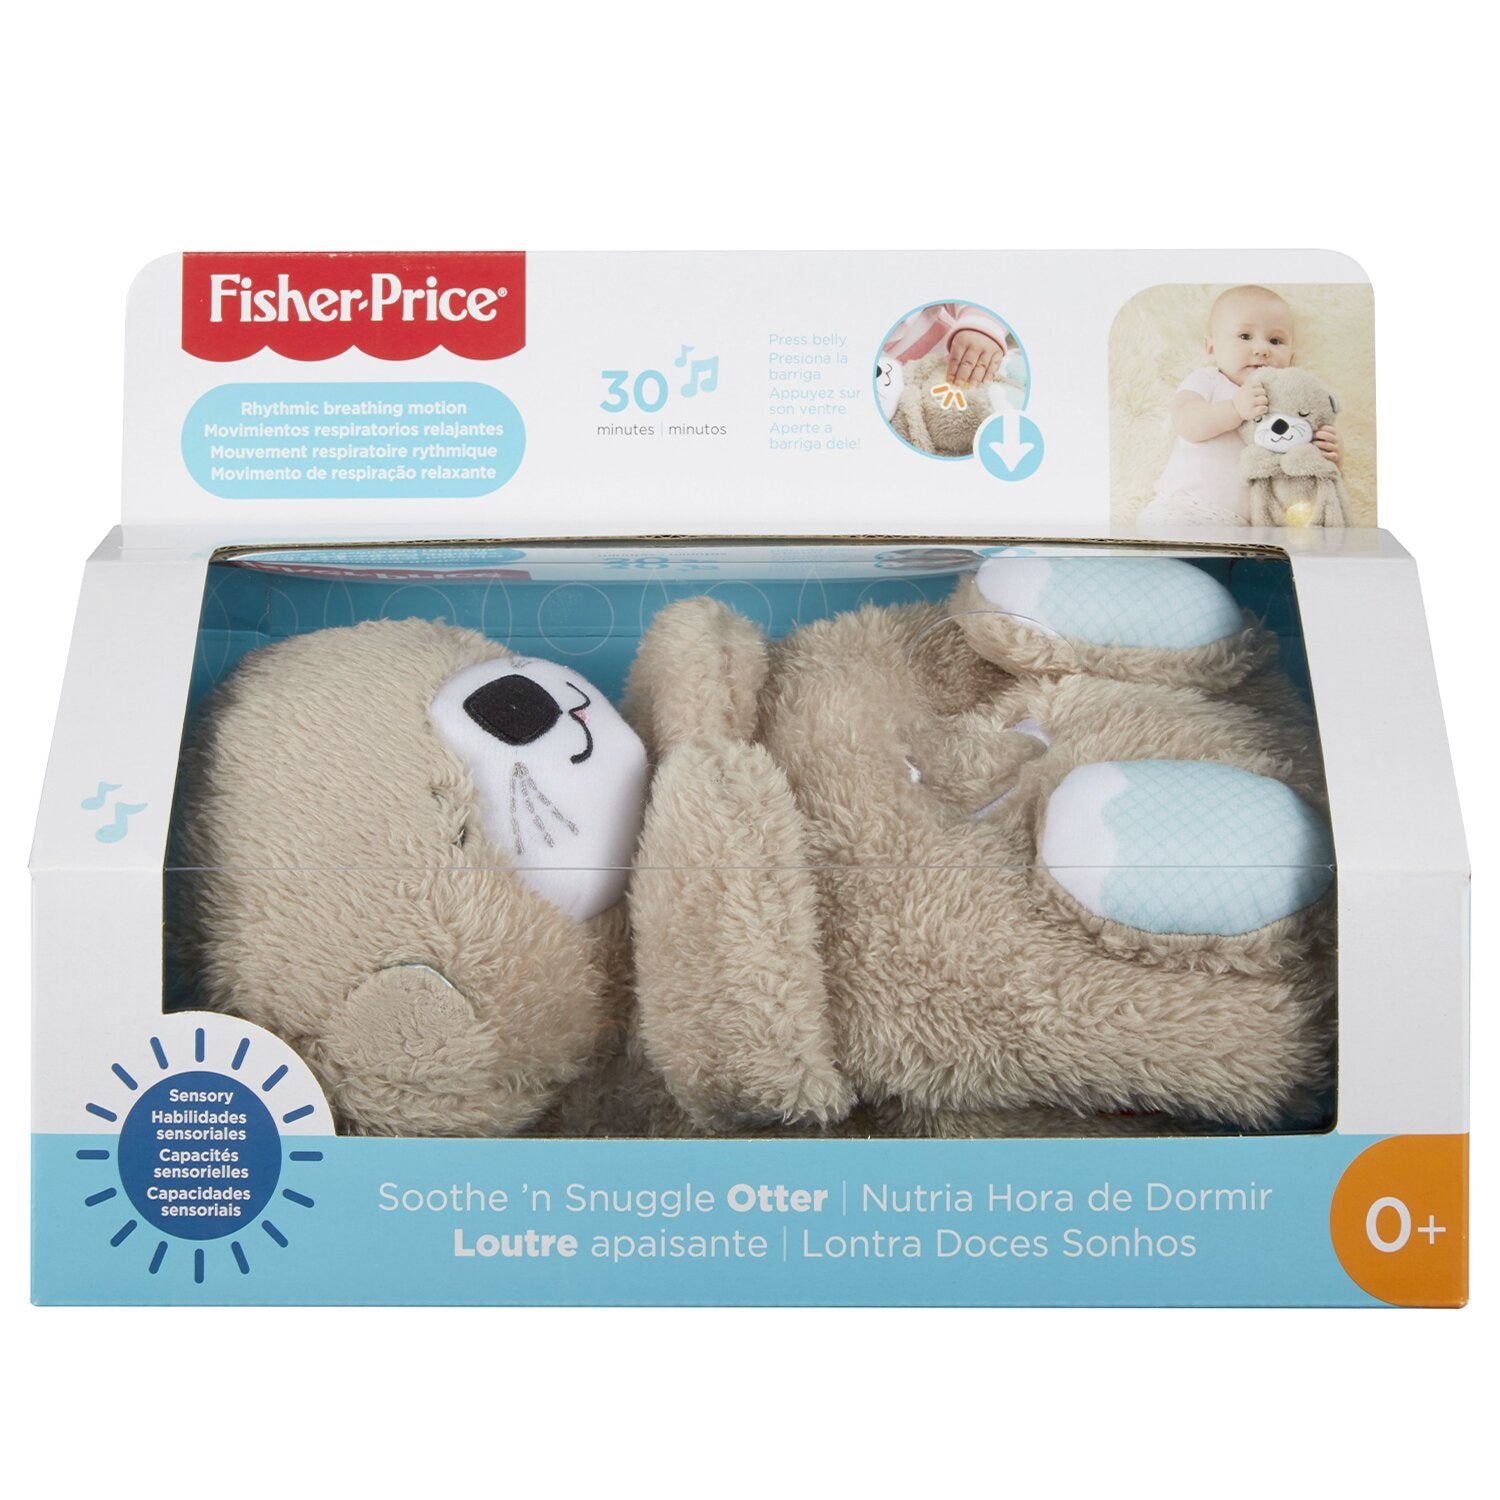 Fisher-Price Soothe 'n Snuggle Otter 31x14x20cm – Fresh Beauty Co. USA